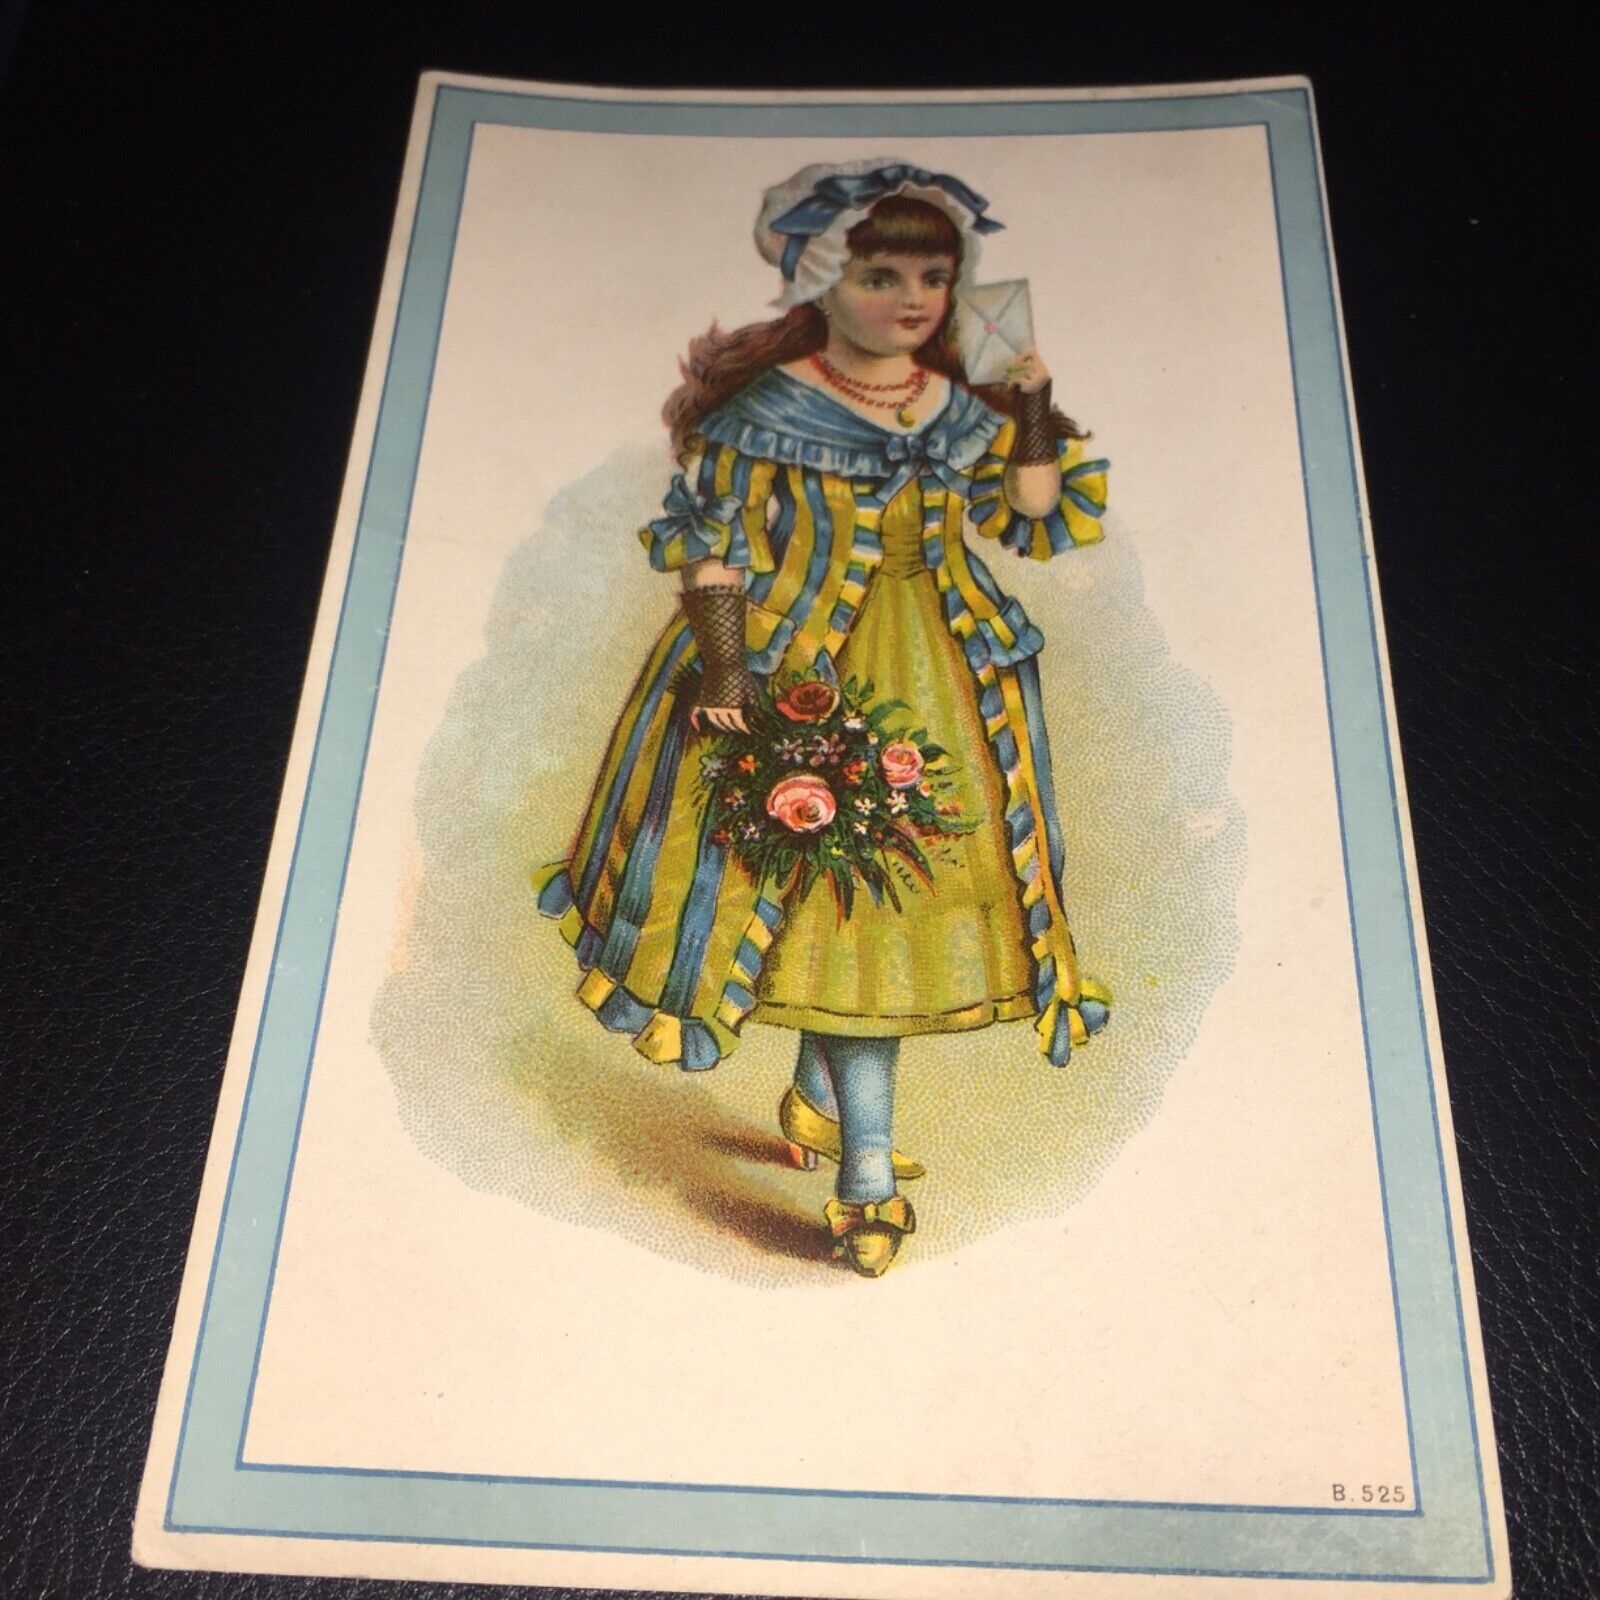 VINTAGE 1880’s LITTLE GIRL IN COLORFUL EUROPEAN DRESS CARD